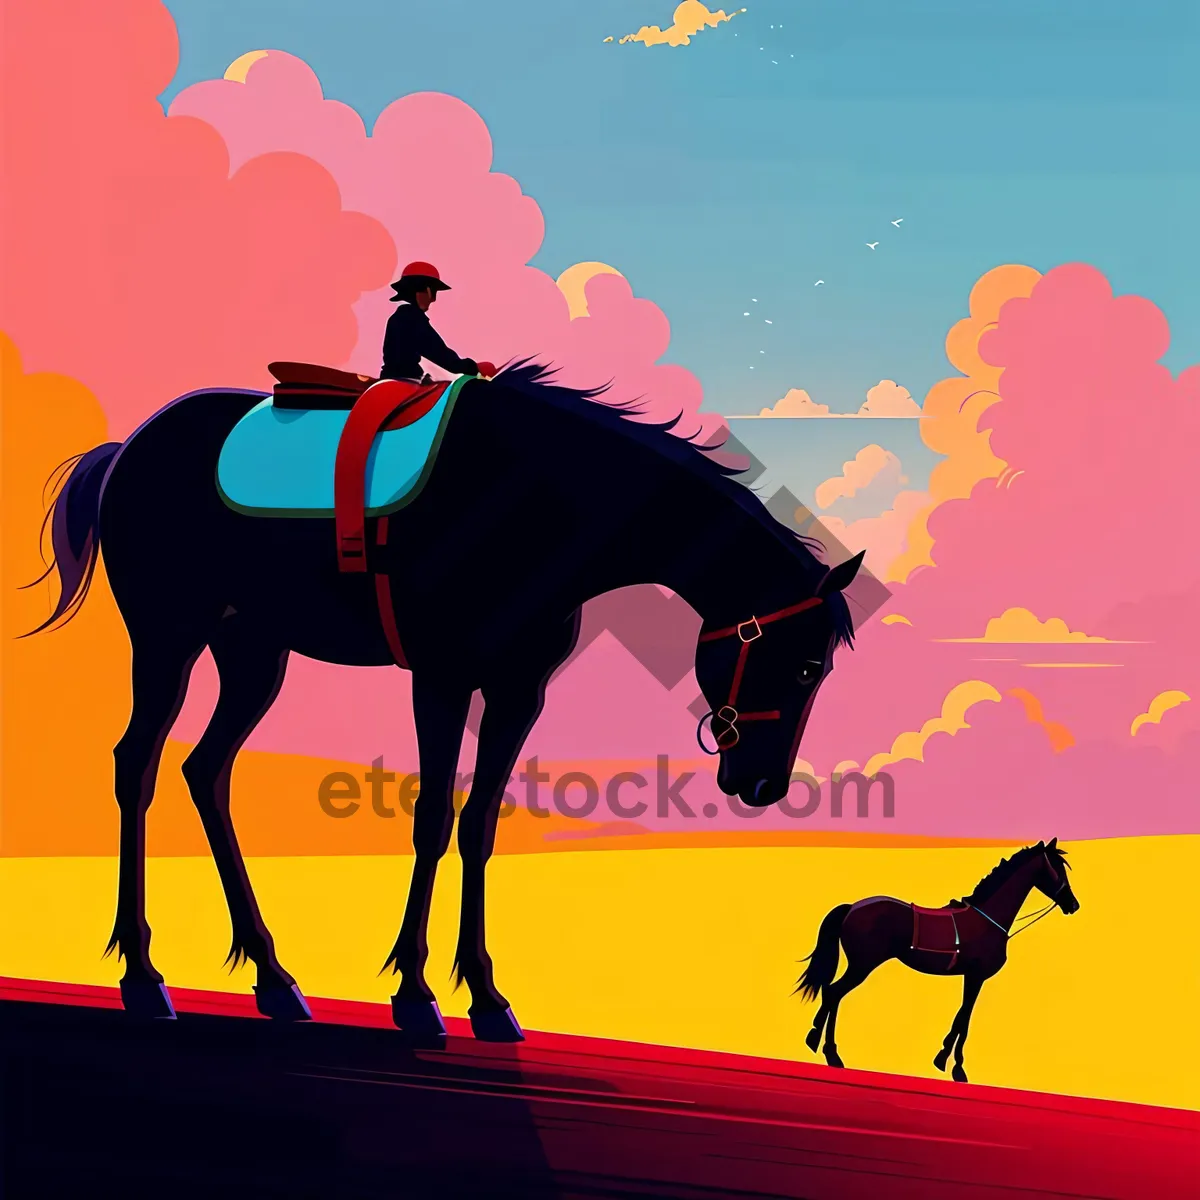 Picture of Giraffe Silhouette in Black: Savanna Recreation with Horse and People